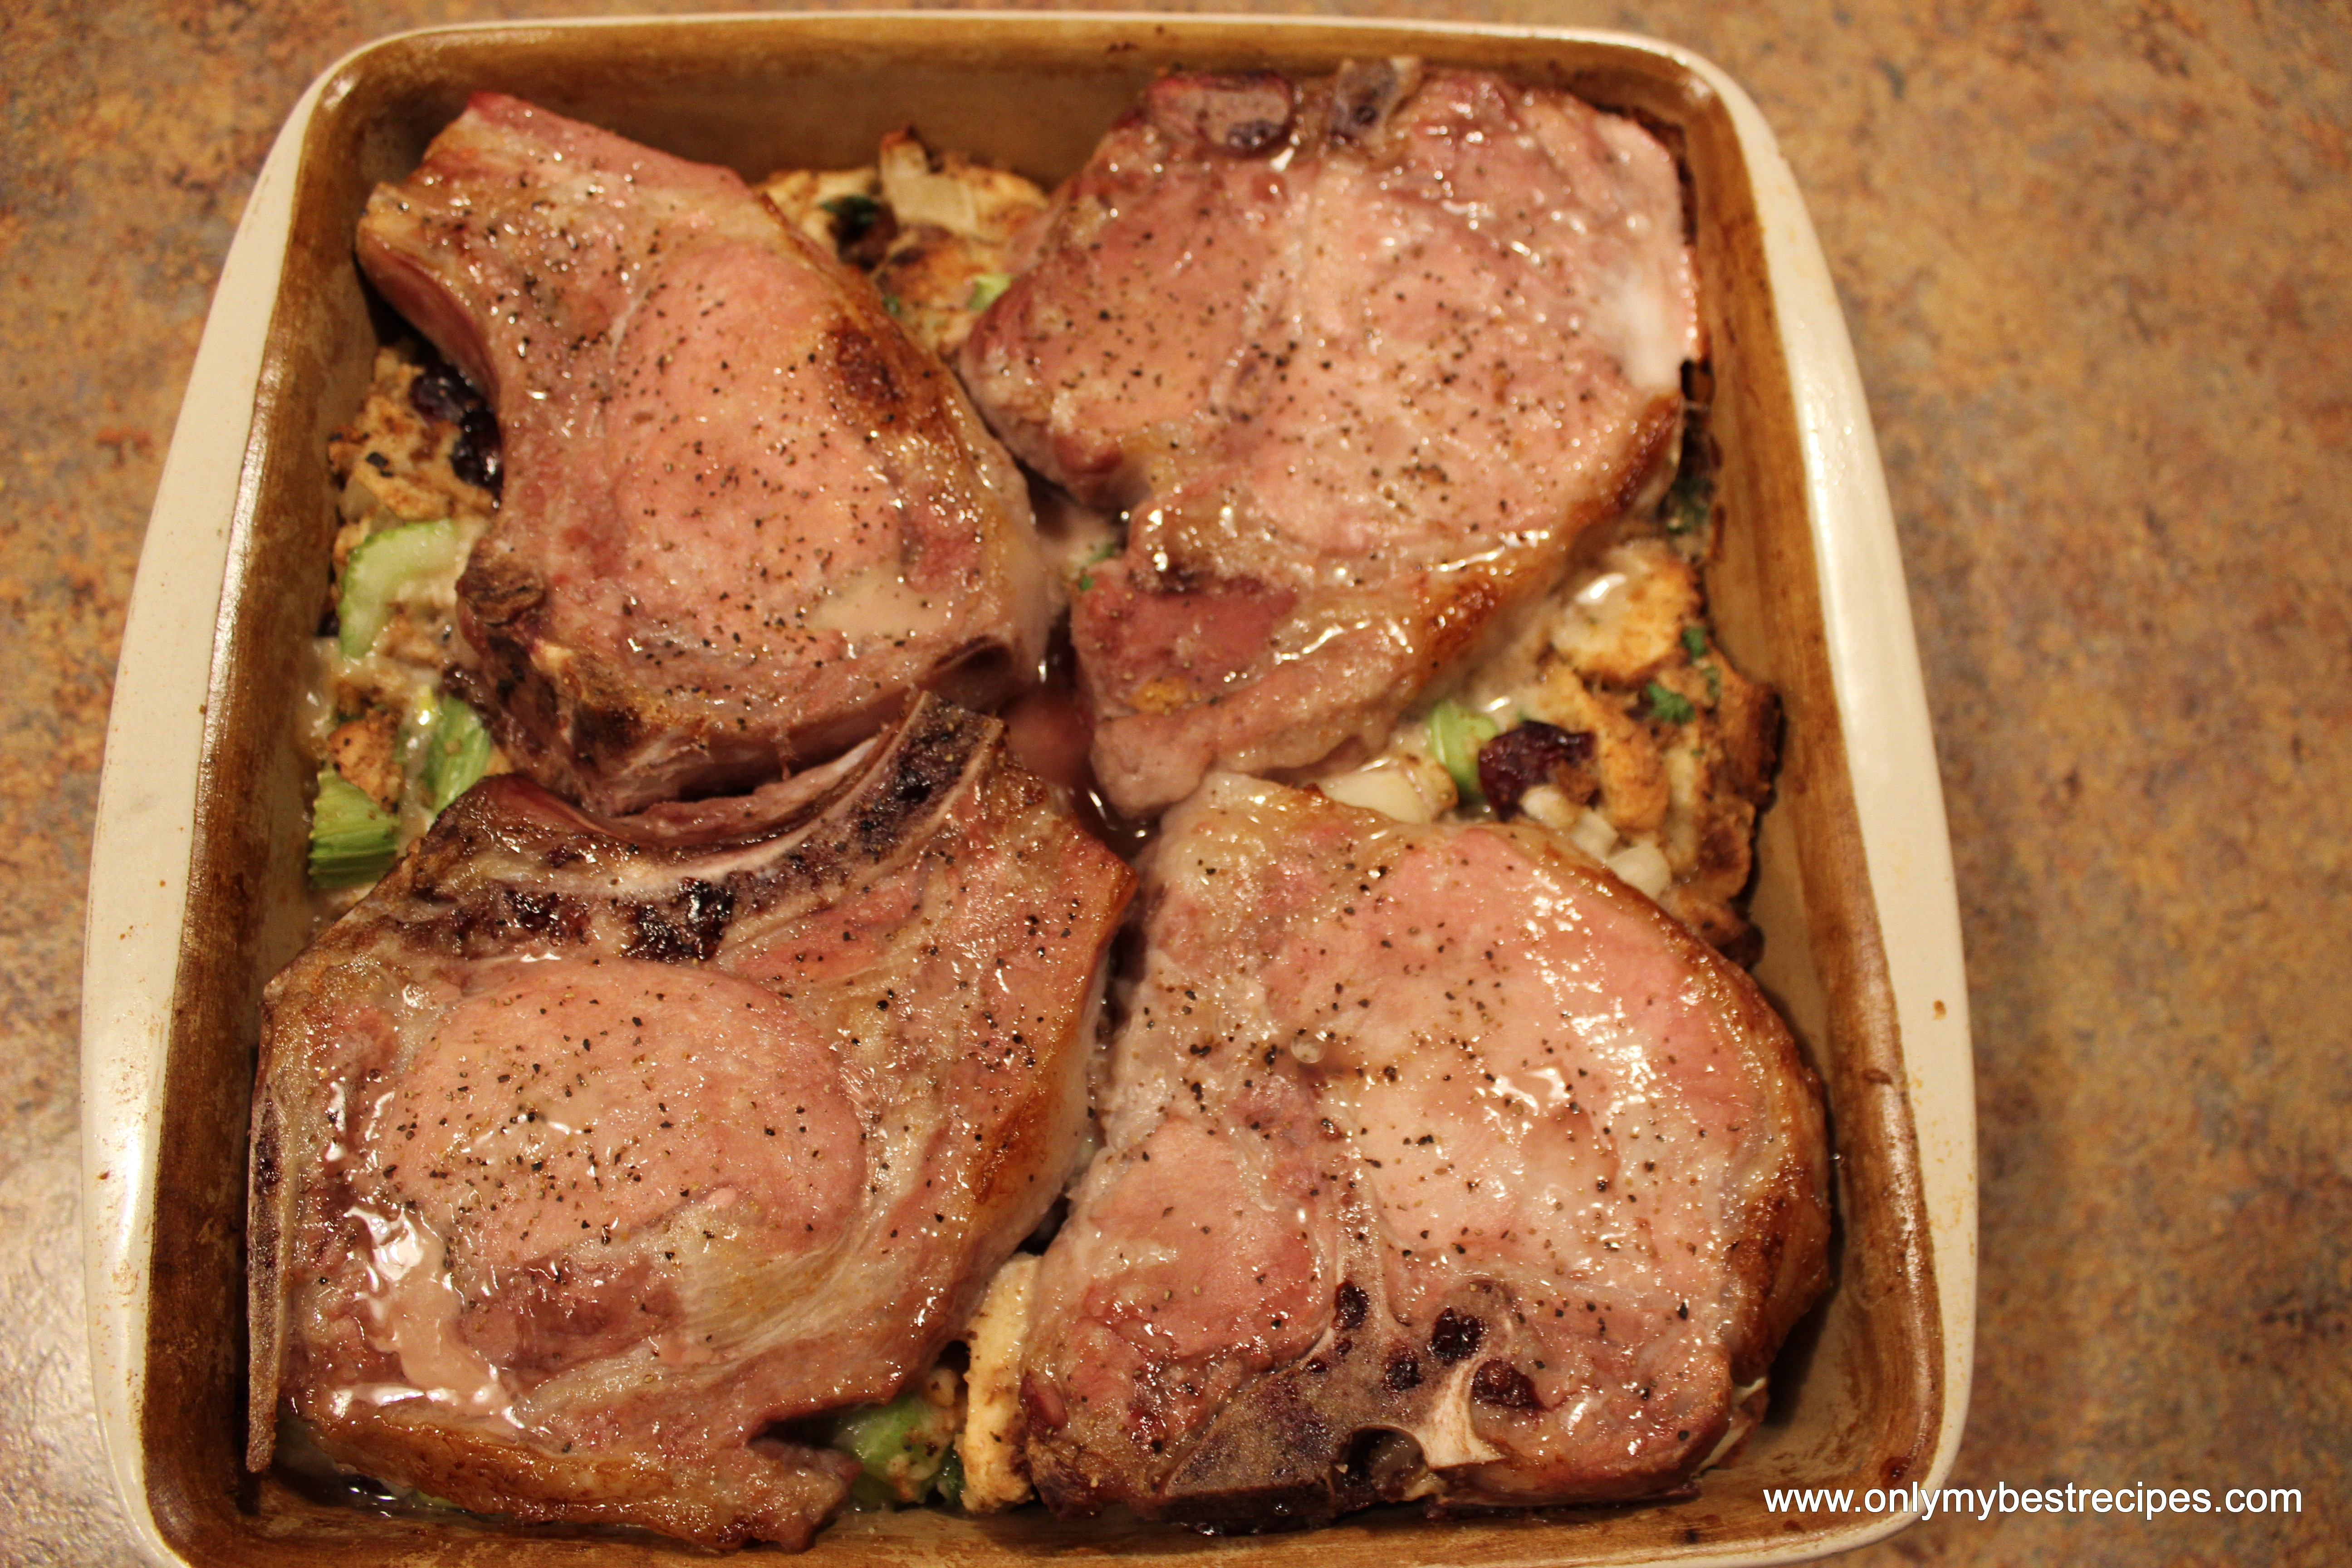 Pork Chops With Stuffing
 Pork Chops and Stuffing not to be confused with stuffed